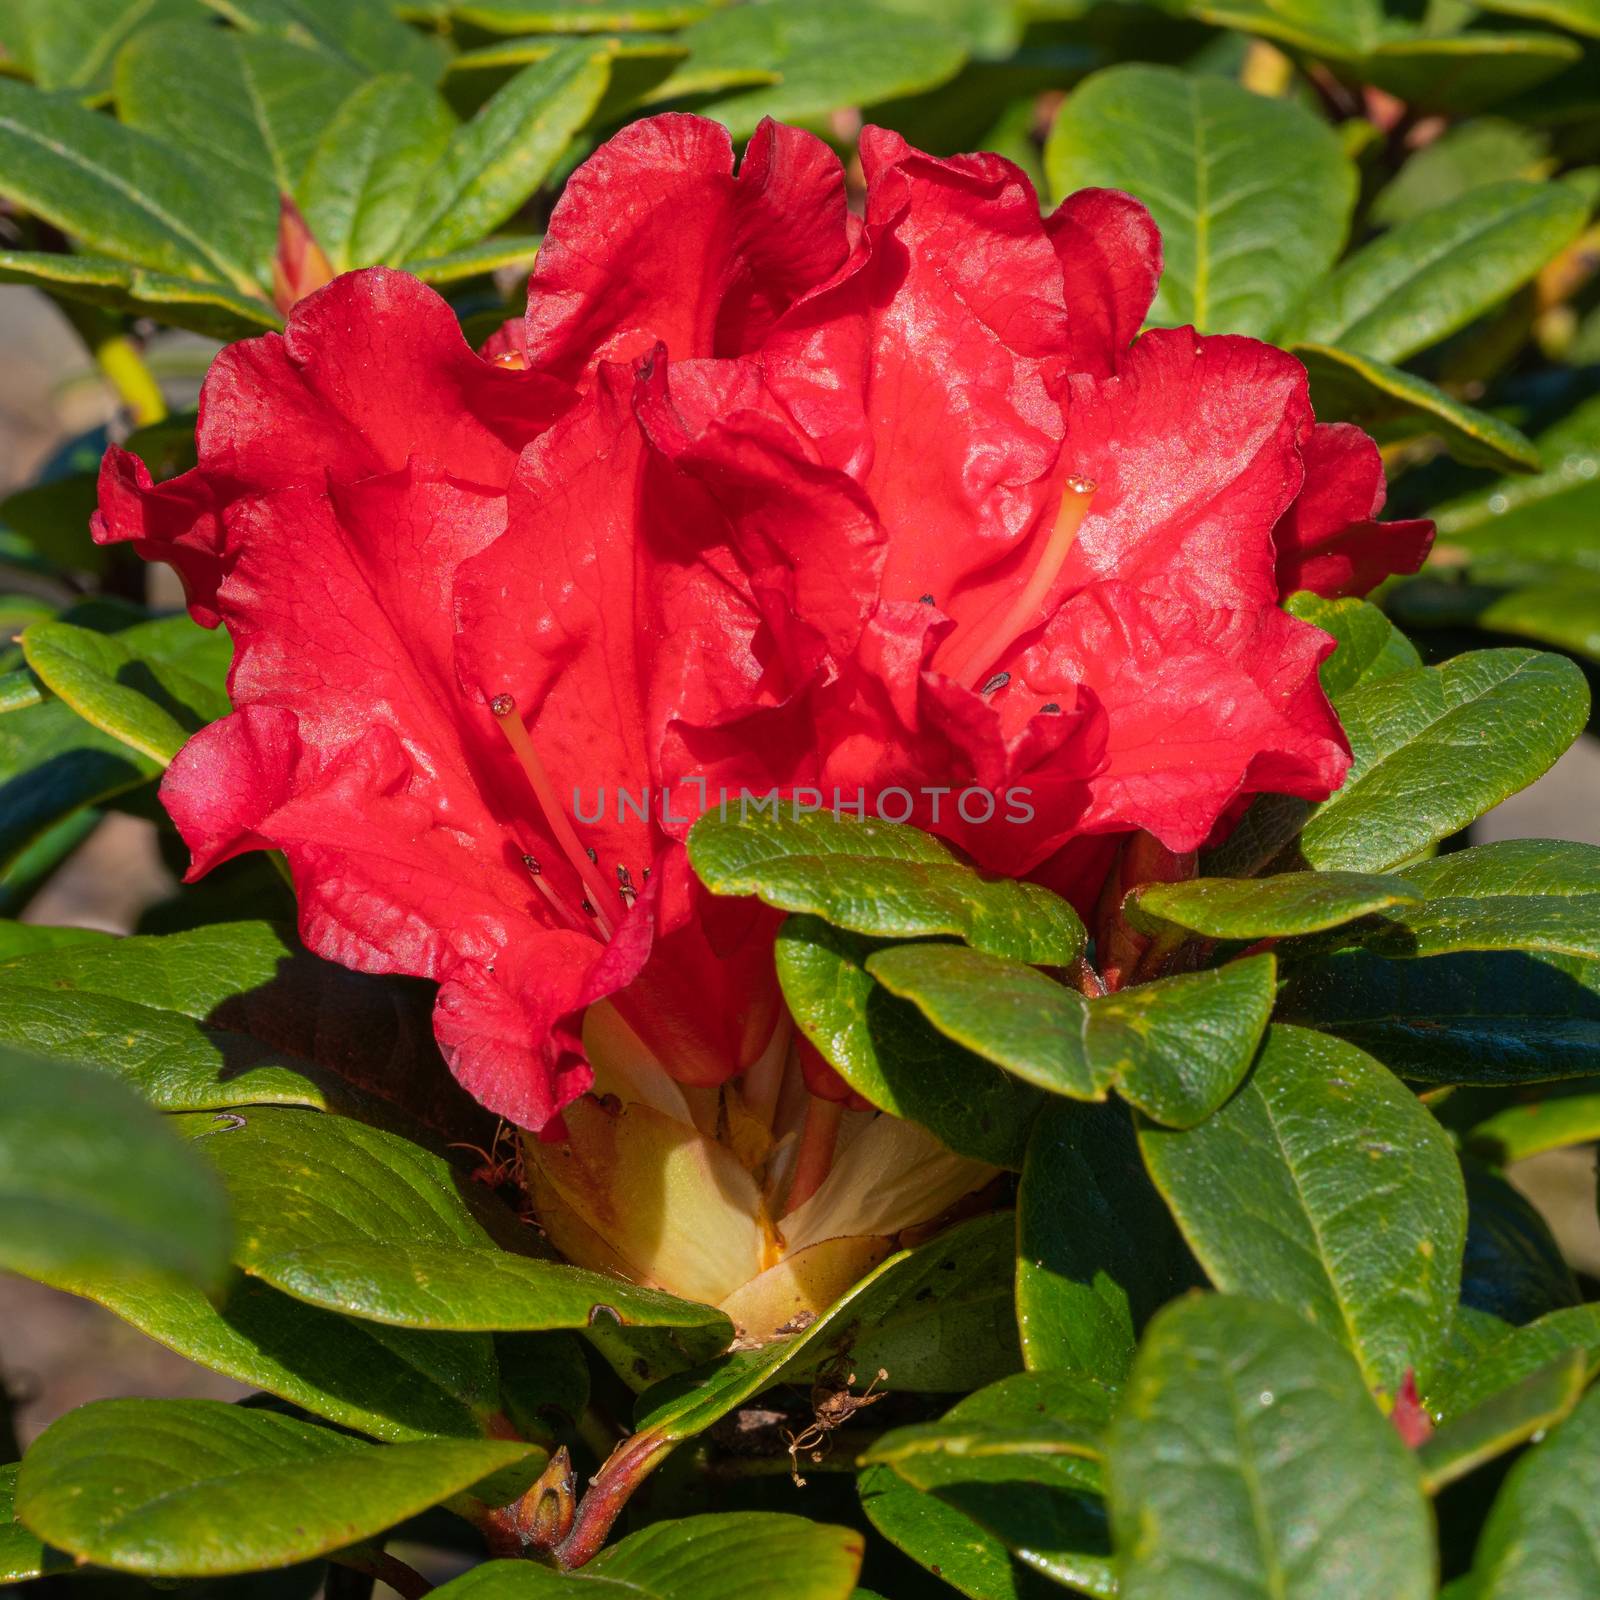 Rhododendron Hybrid Rabatz (Rhododendron hybrid), close up of the flower head